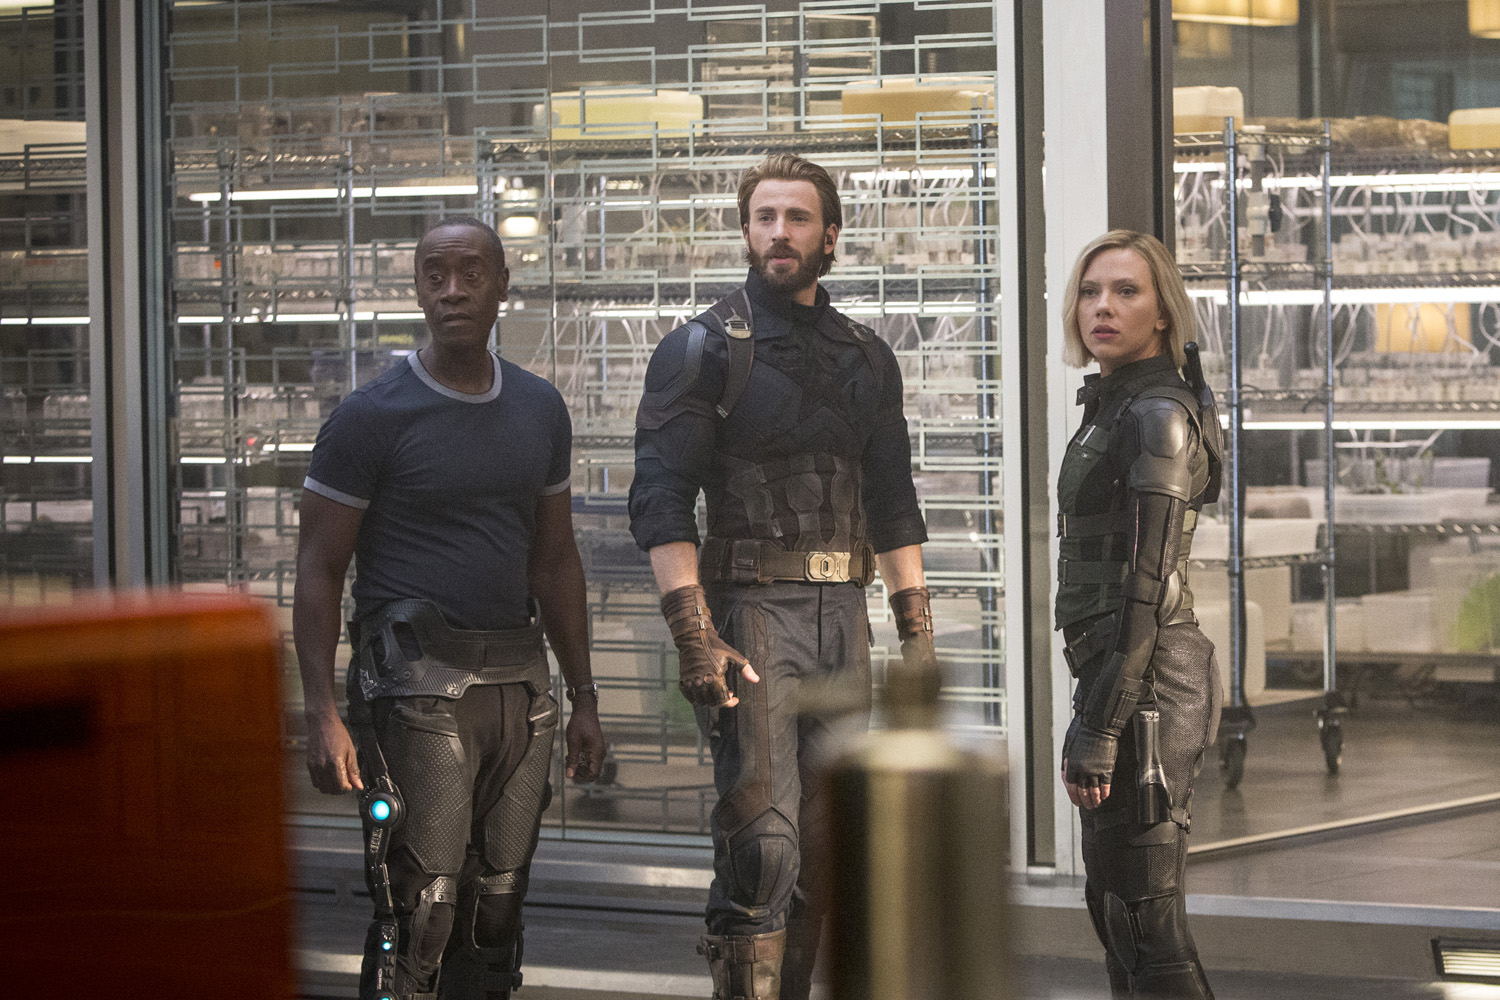 INFINITY WAR. The movie earns the biggest box office gross in the Philippines. From left to right: War Machine/James Rhodes (Don Cheadle), Captain America/Steve Rogers (Chris Evans) and Black Widow (Scarlett Johansson). Photo by Chuck Zlotnick/Marvel Studios 2018  